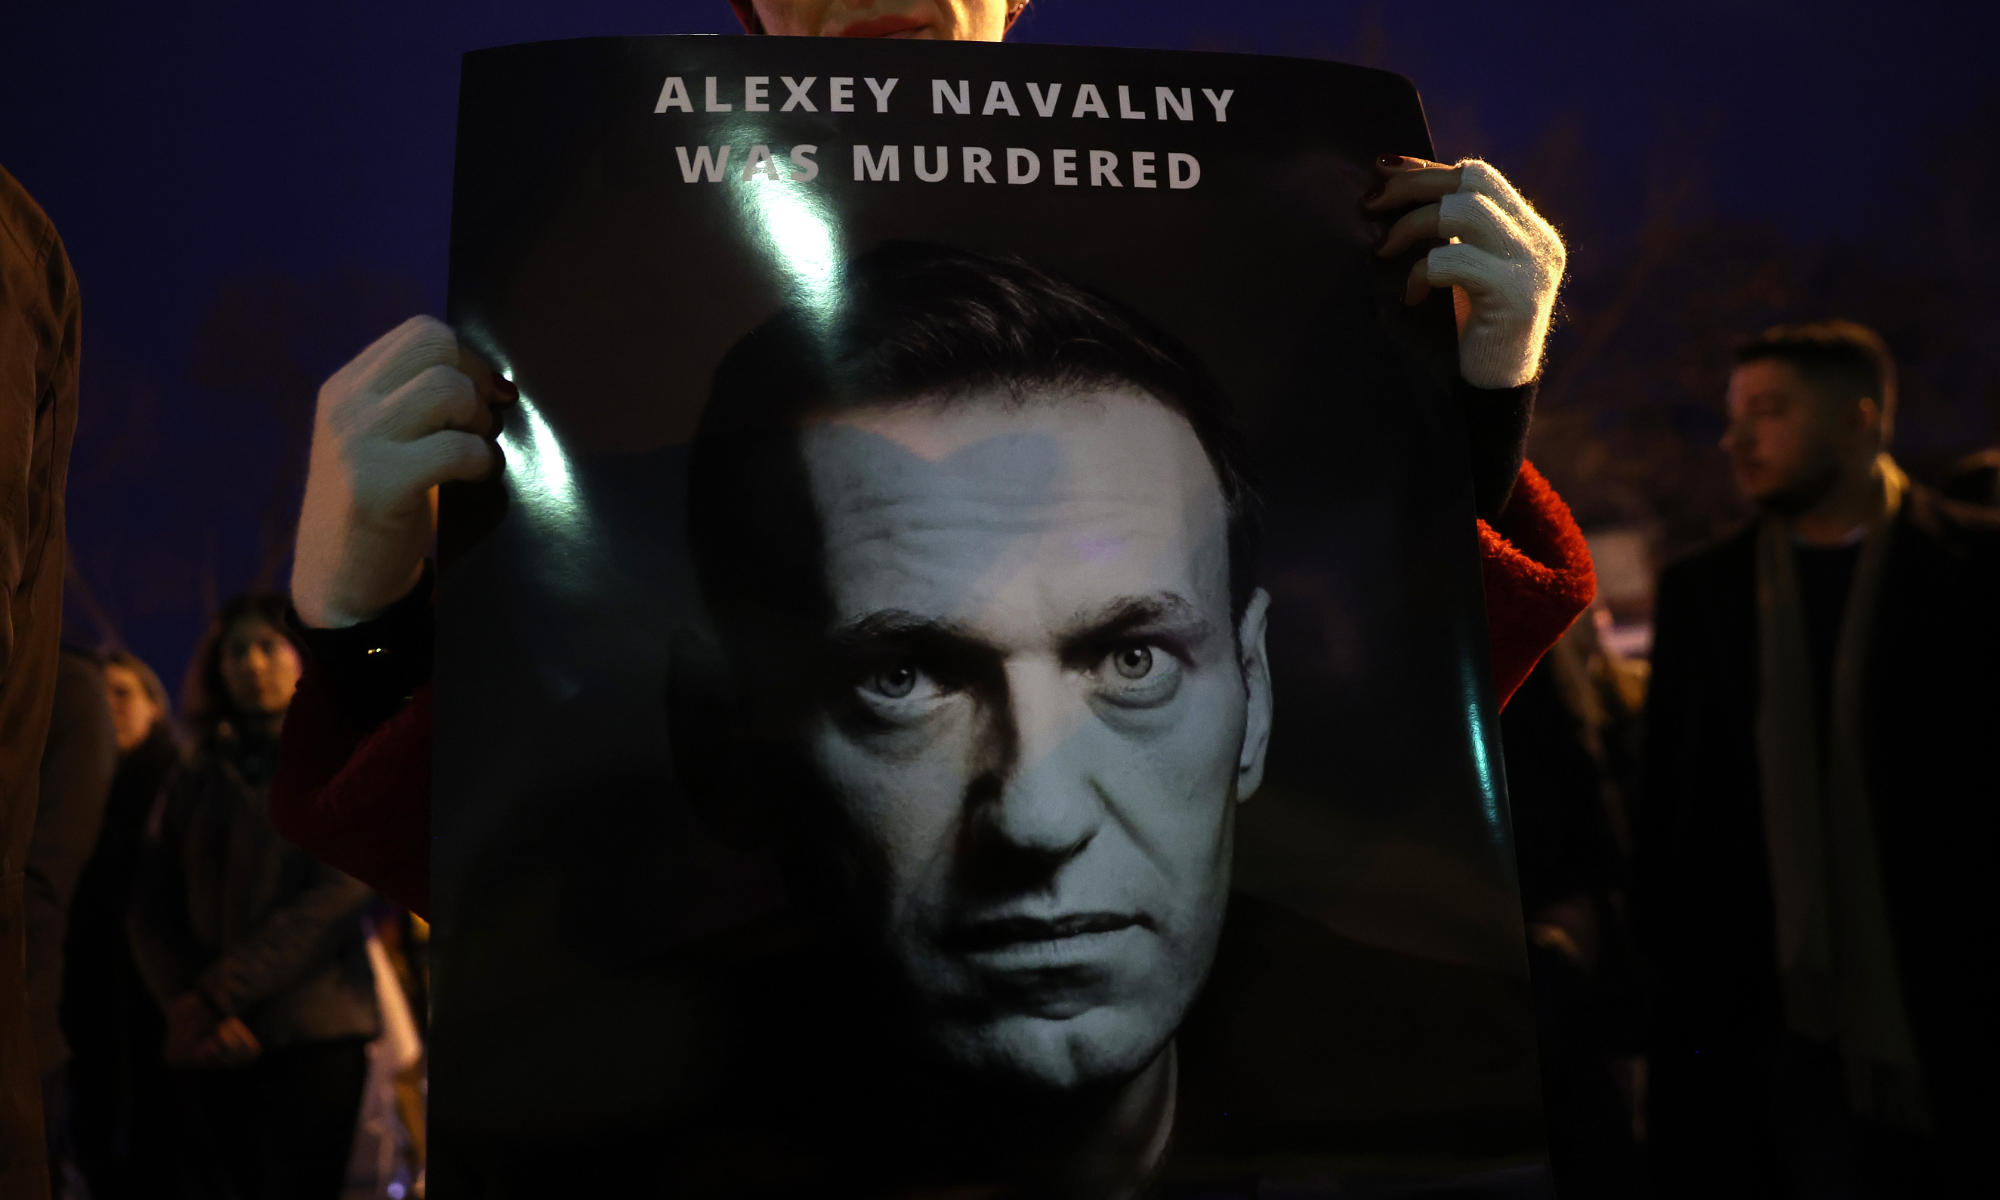 Supporters hold up a poster featuring the face of Alexei Navalny and the words "Alexei Navalny was murdered" during a nighttime vigil.